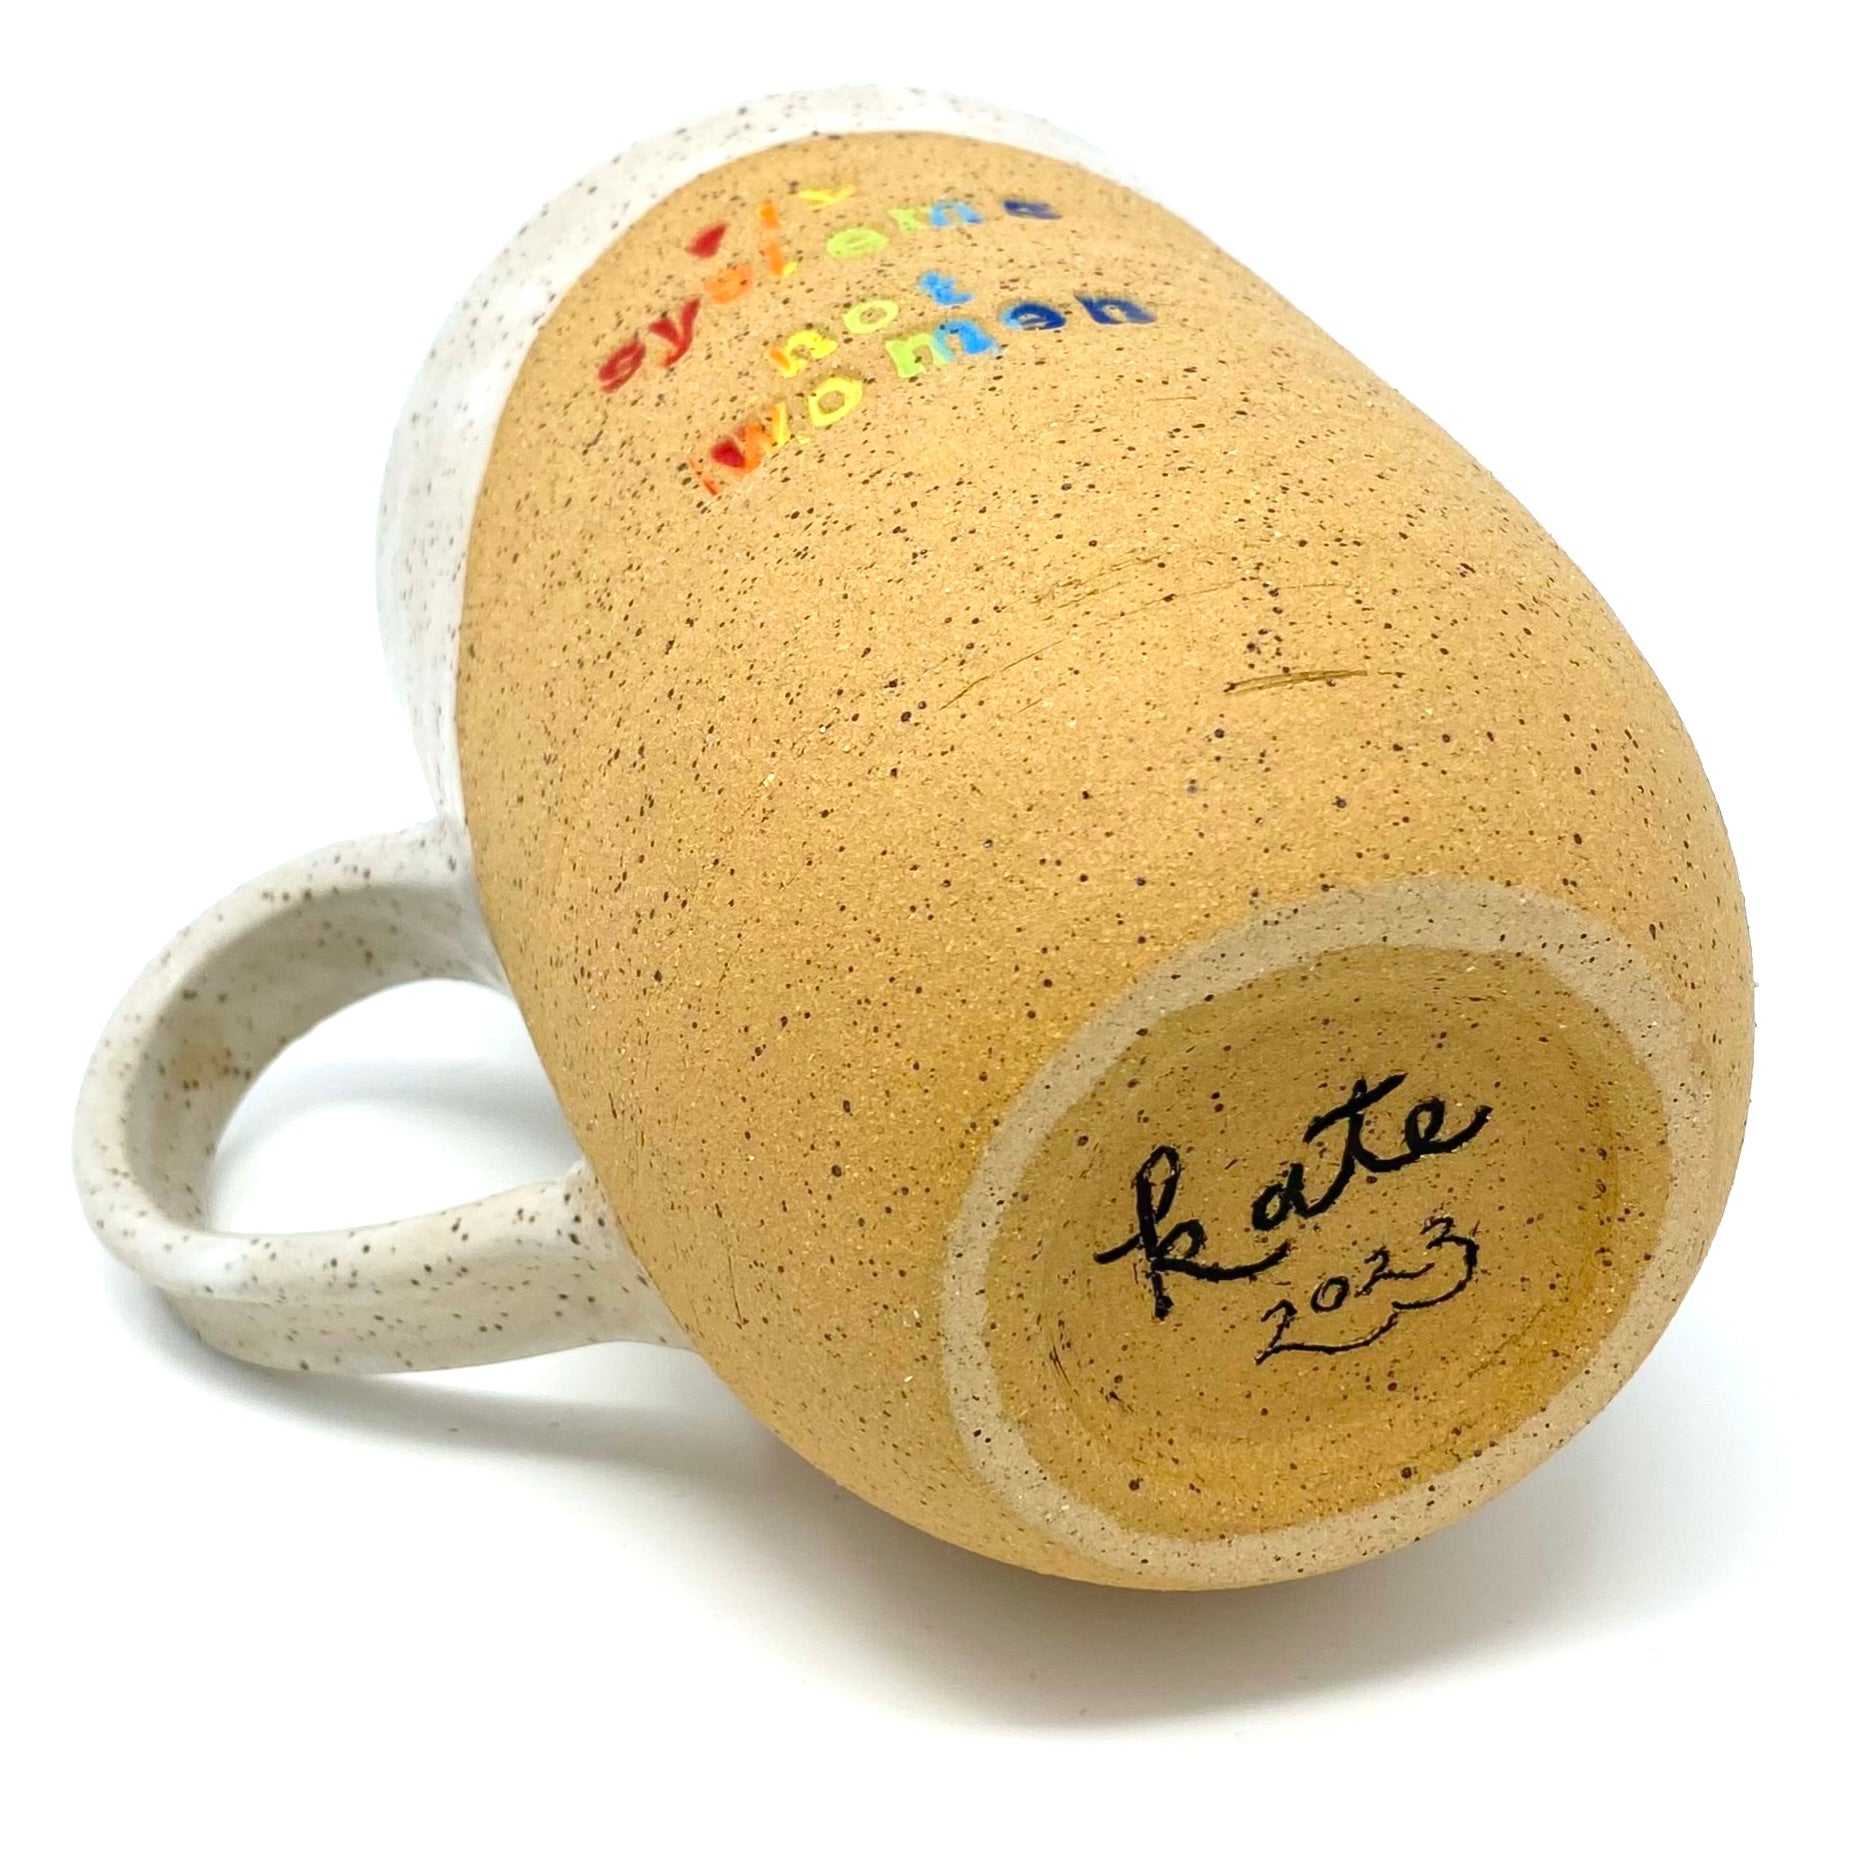 mug as seen from the bottom, with a sanded foot ring, and signed "kate 2023" in black.